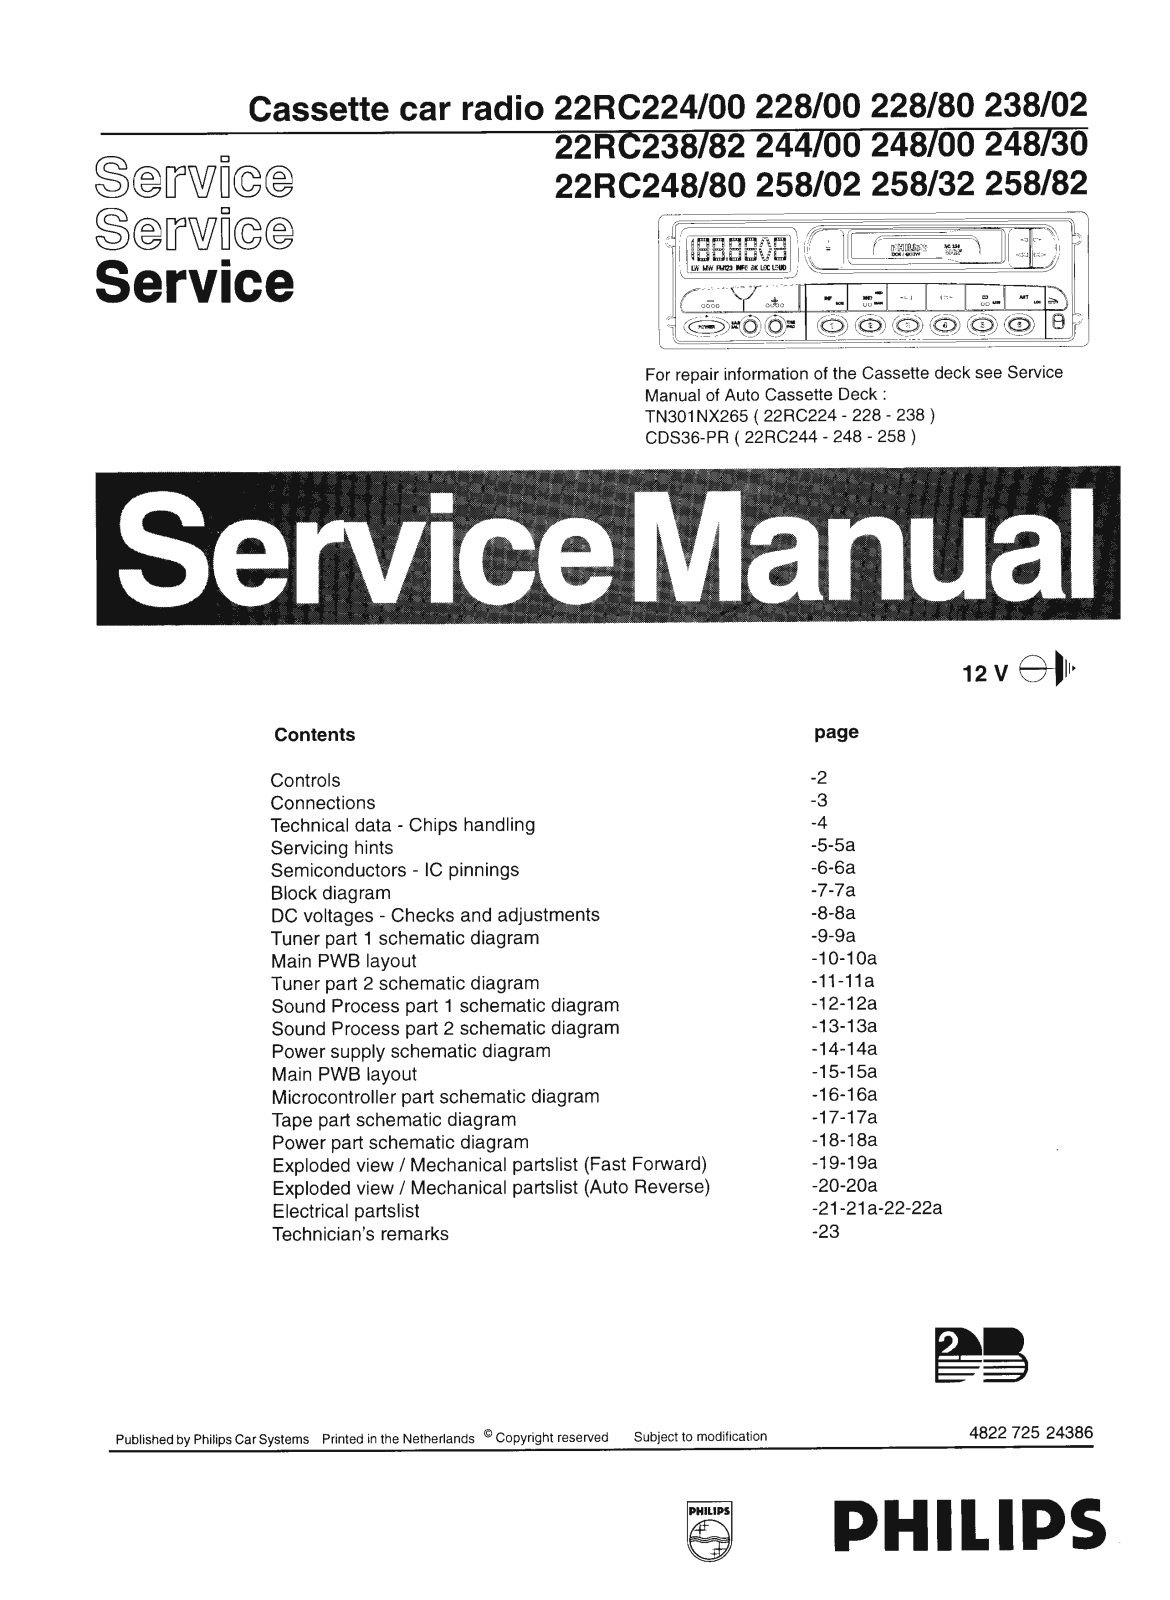 Philips 22-RC-244 Service Manual